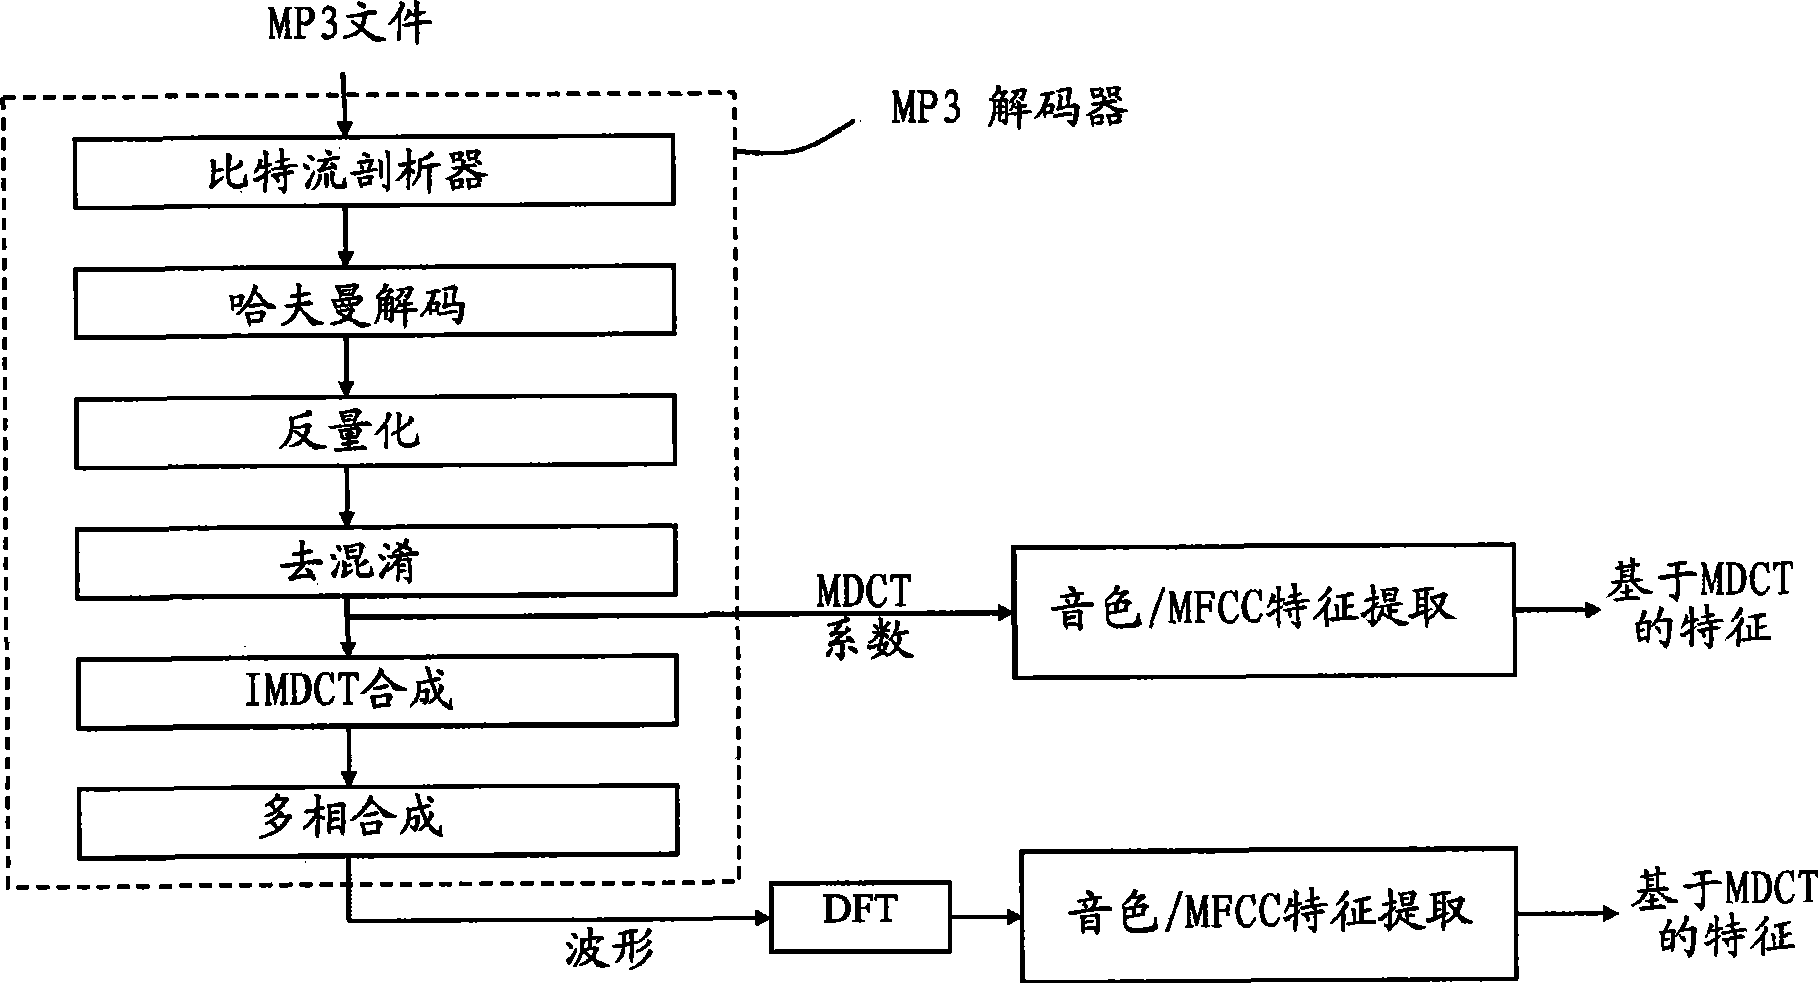 Rapid music assorting and searching method and device